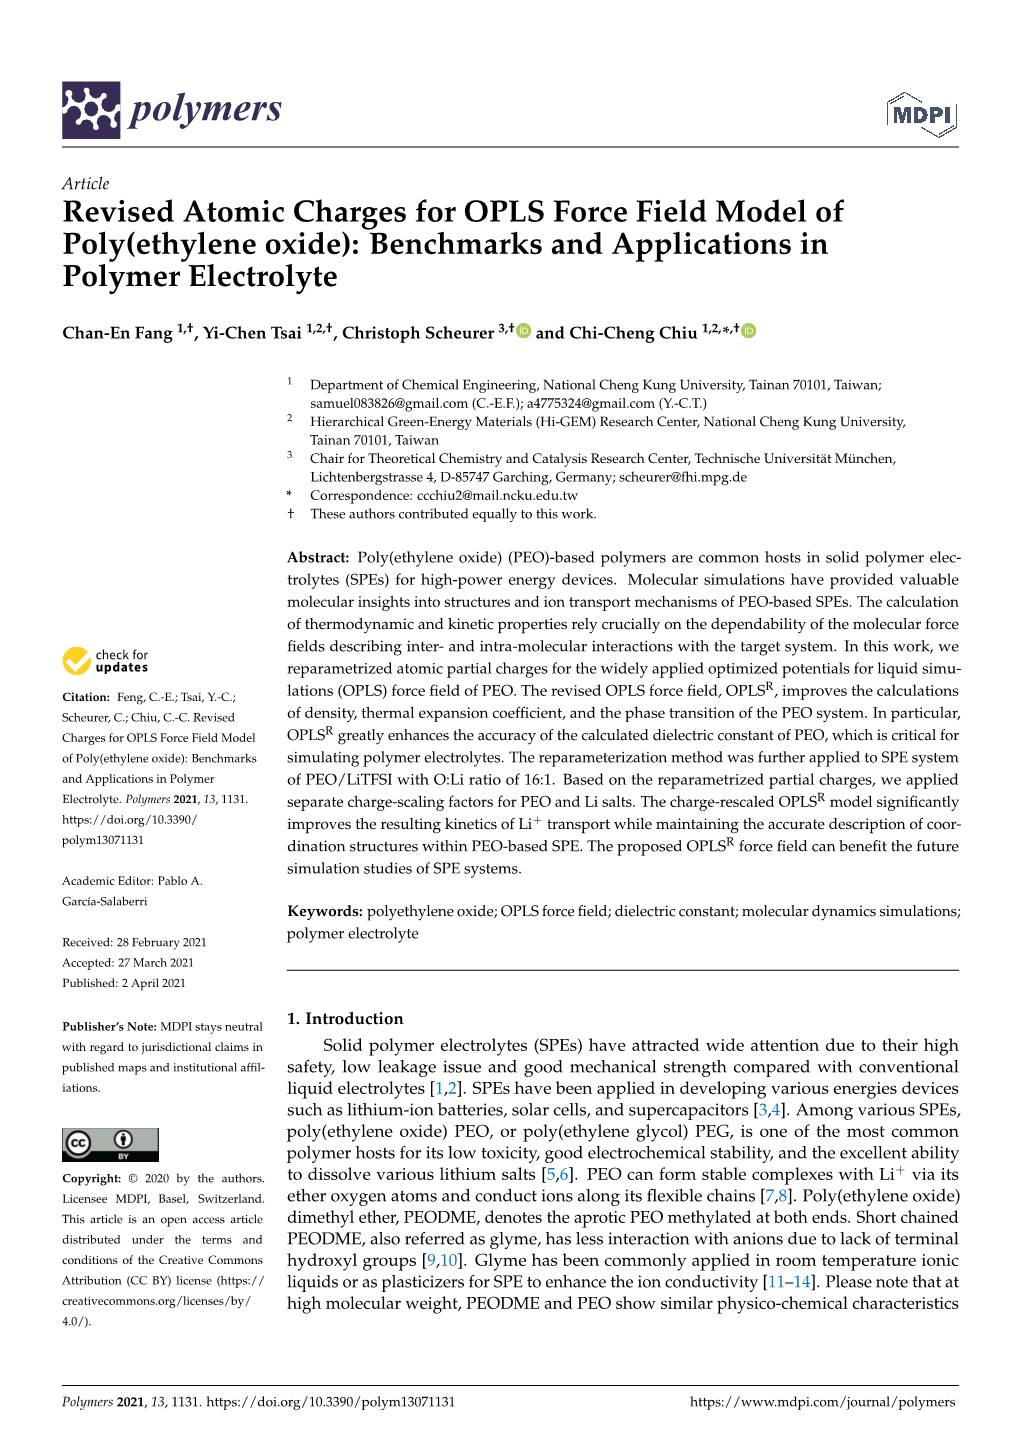 Revised Atomic Charges for OPLS Force Field Model of Poly(Ethylene Oxide): Benchmarks and Applications in Polymer Electrolyte